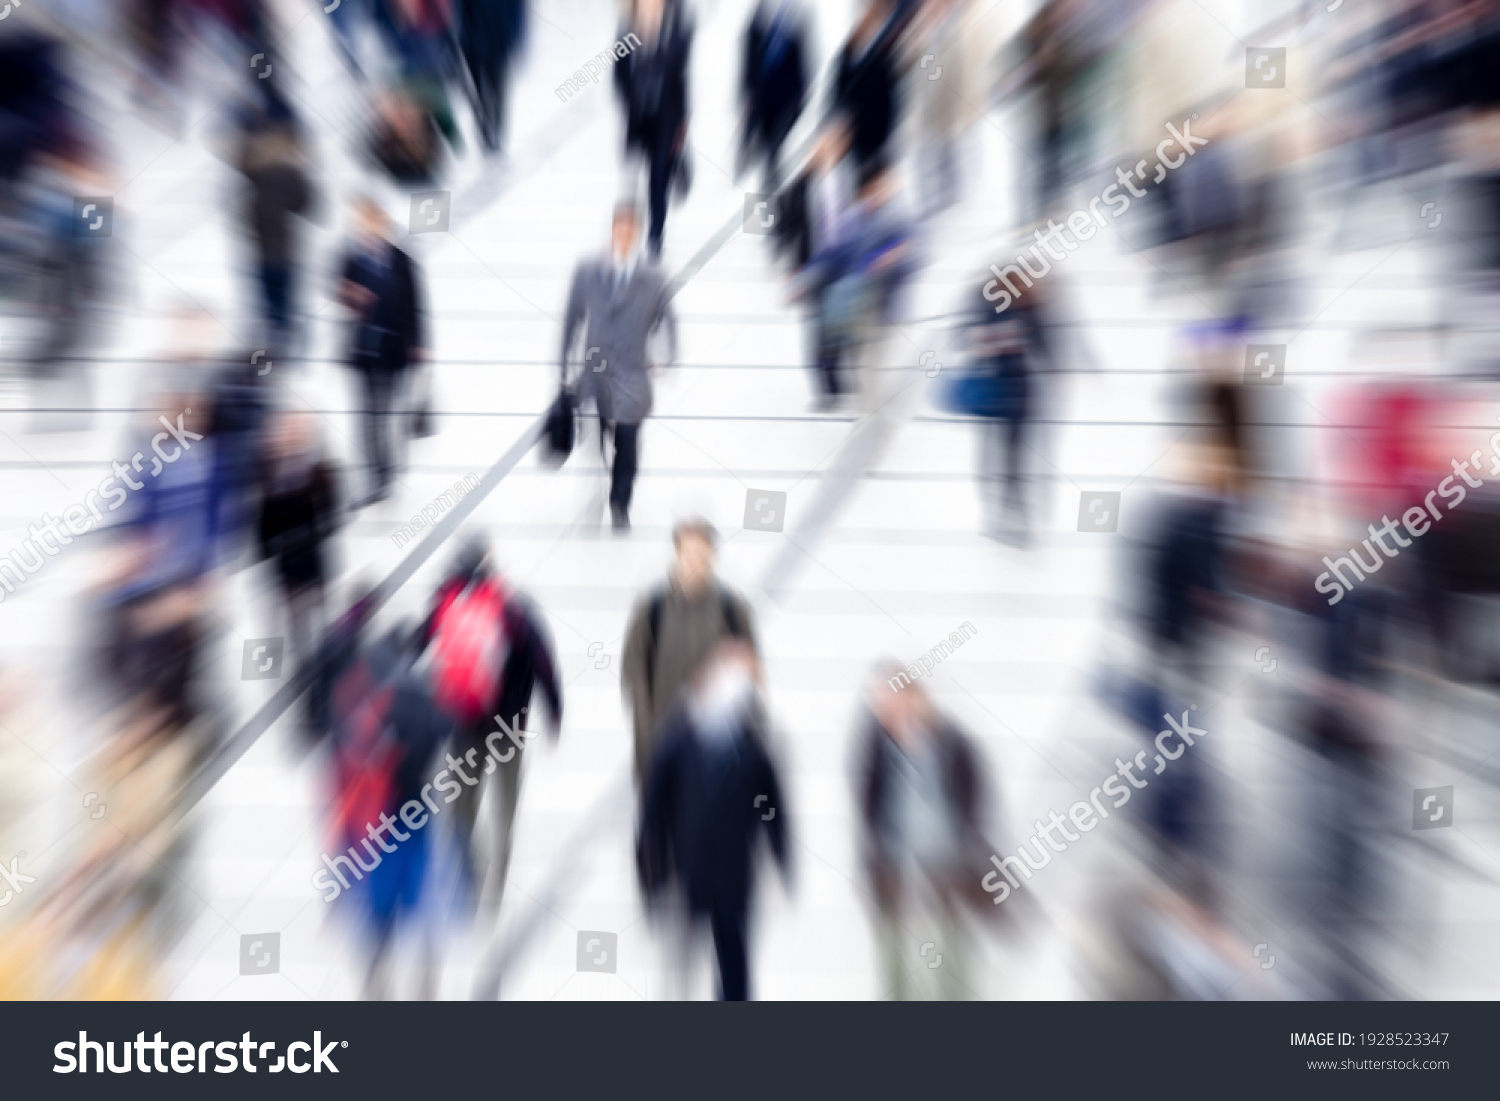 Blurred group of people walking during rush hour #1928523347